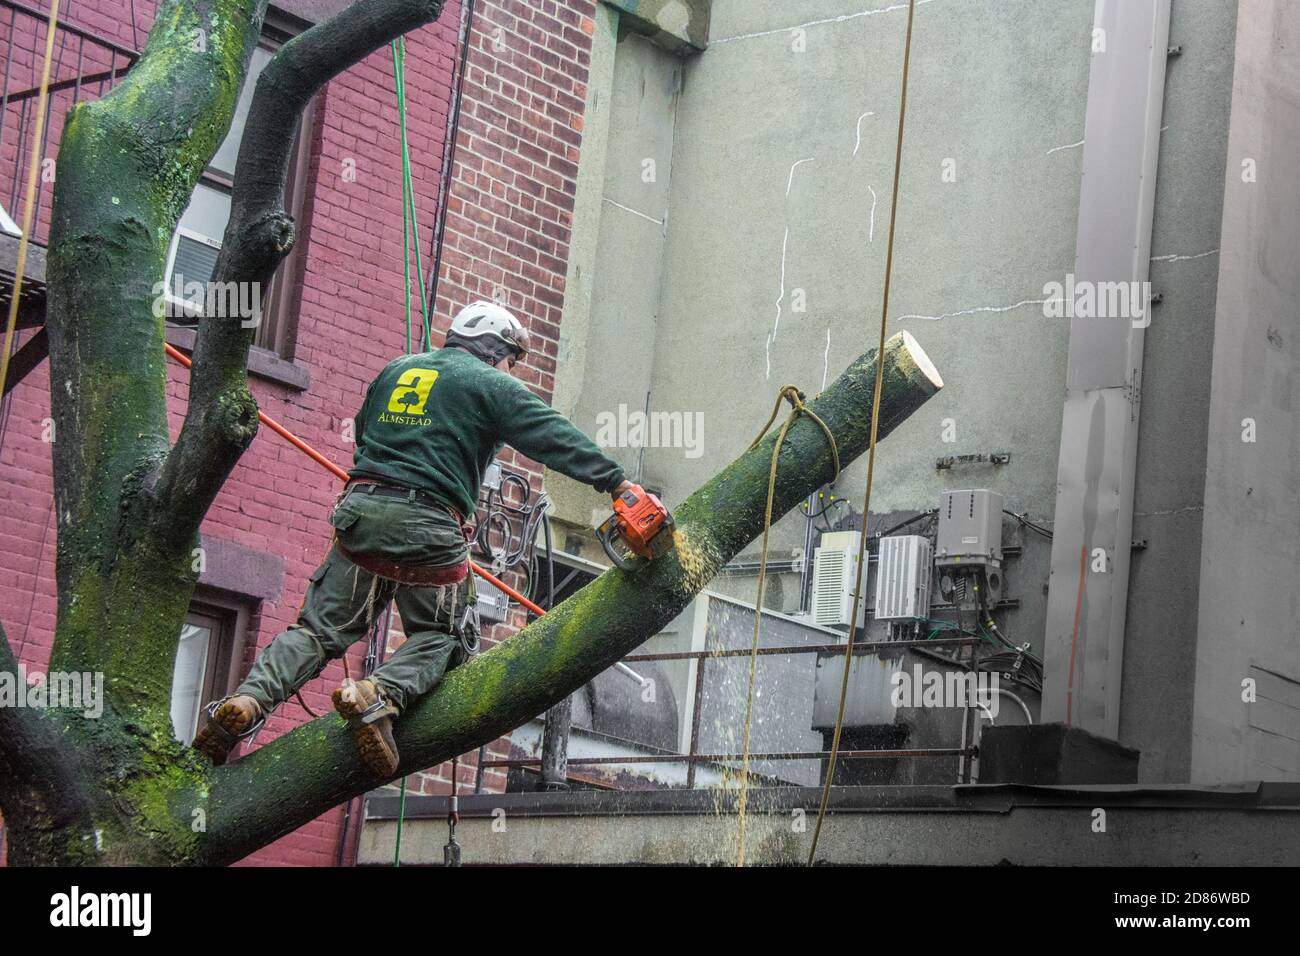 Tree trimmer working on tree removal in the courtyard garden of a Greenwich Village building in New York City, NY, USA Stock Photo